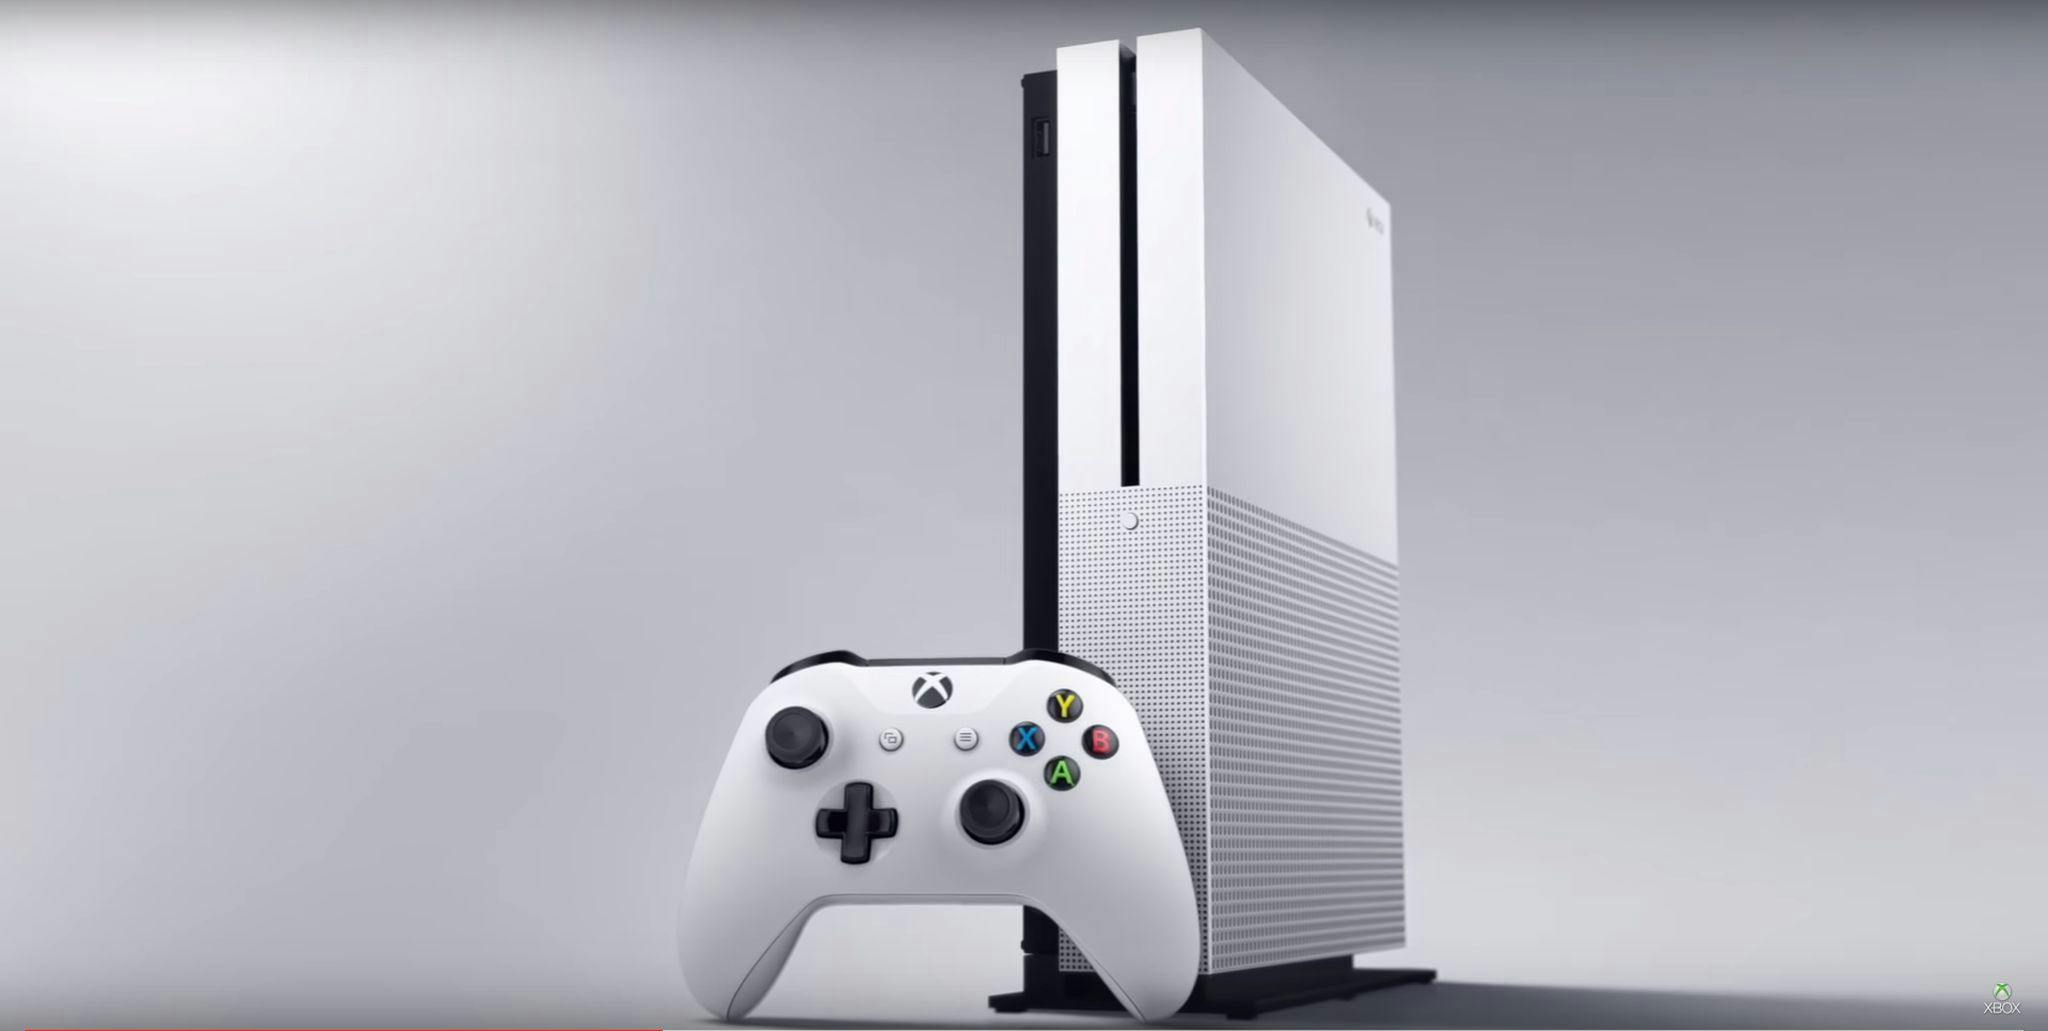 Xbox One S is a 4k streaming device